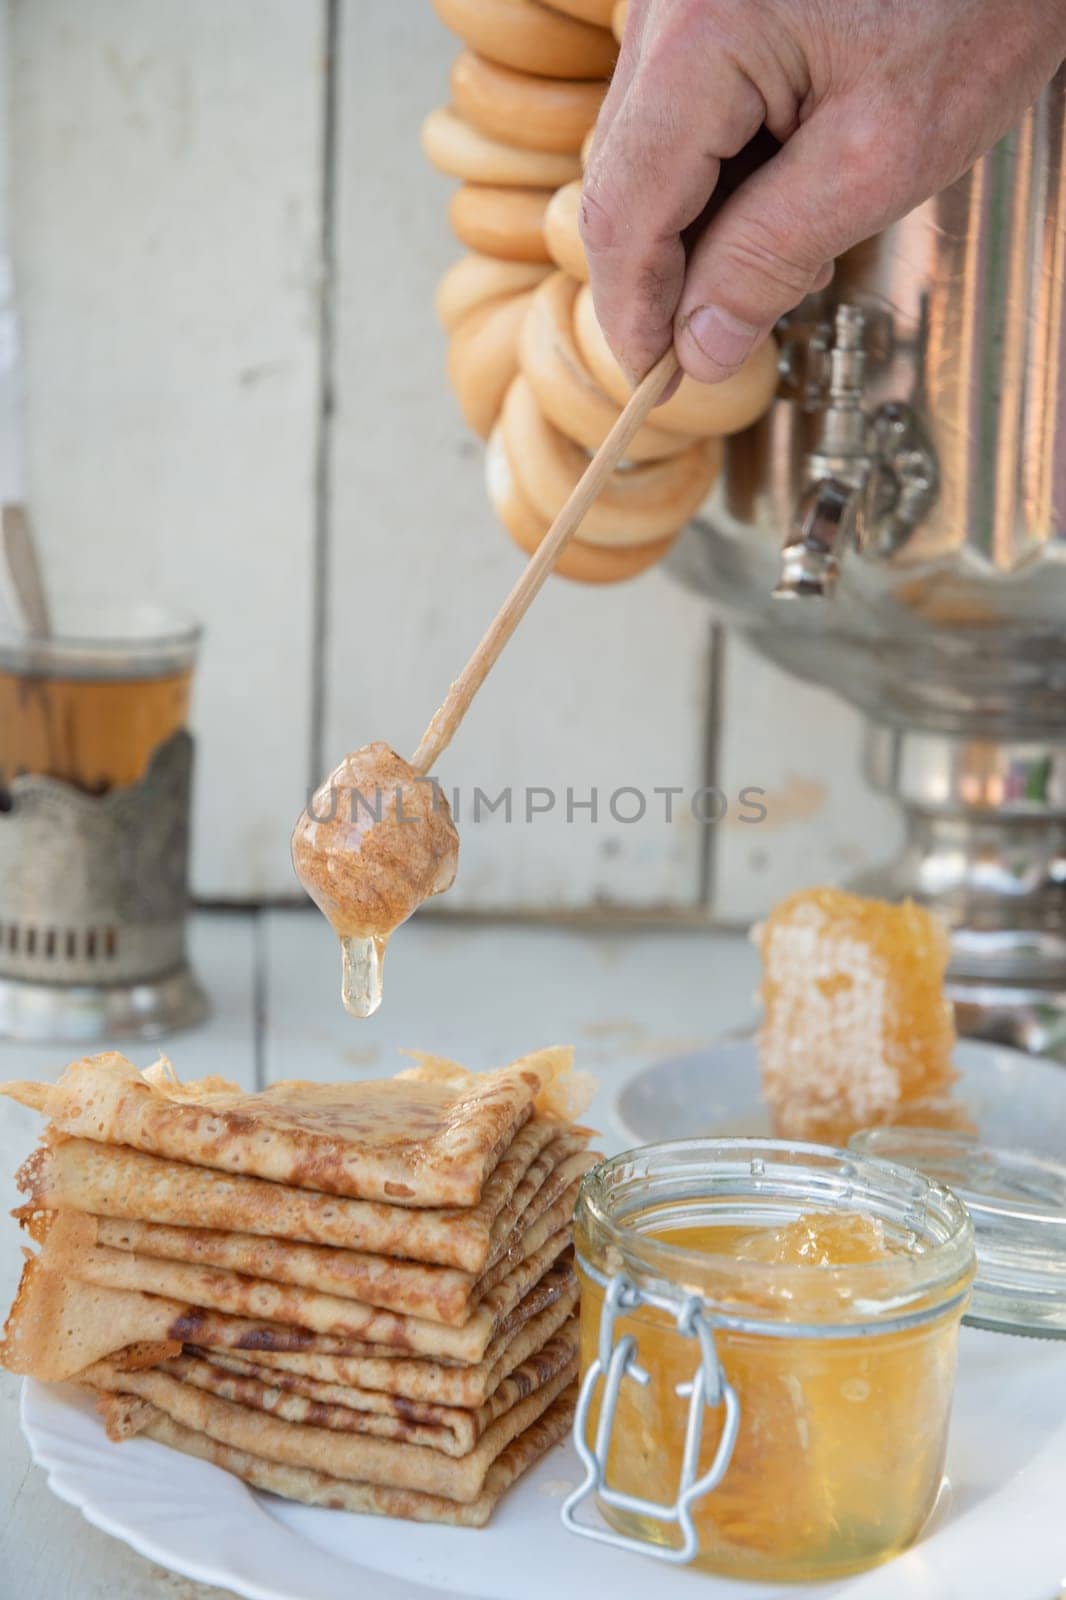 A man pours honey on pancakes and drinks tea from a samovar, Russian tradition of celebrating Maslenitsa. High quality photo